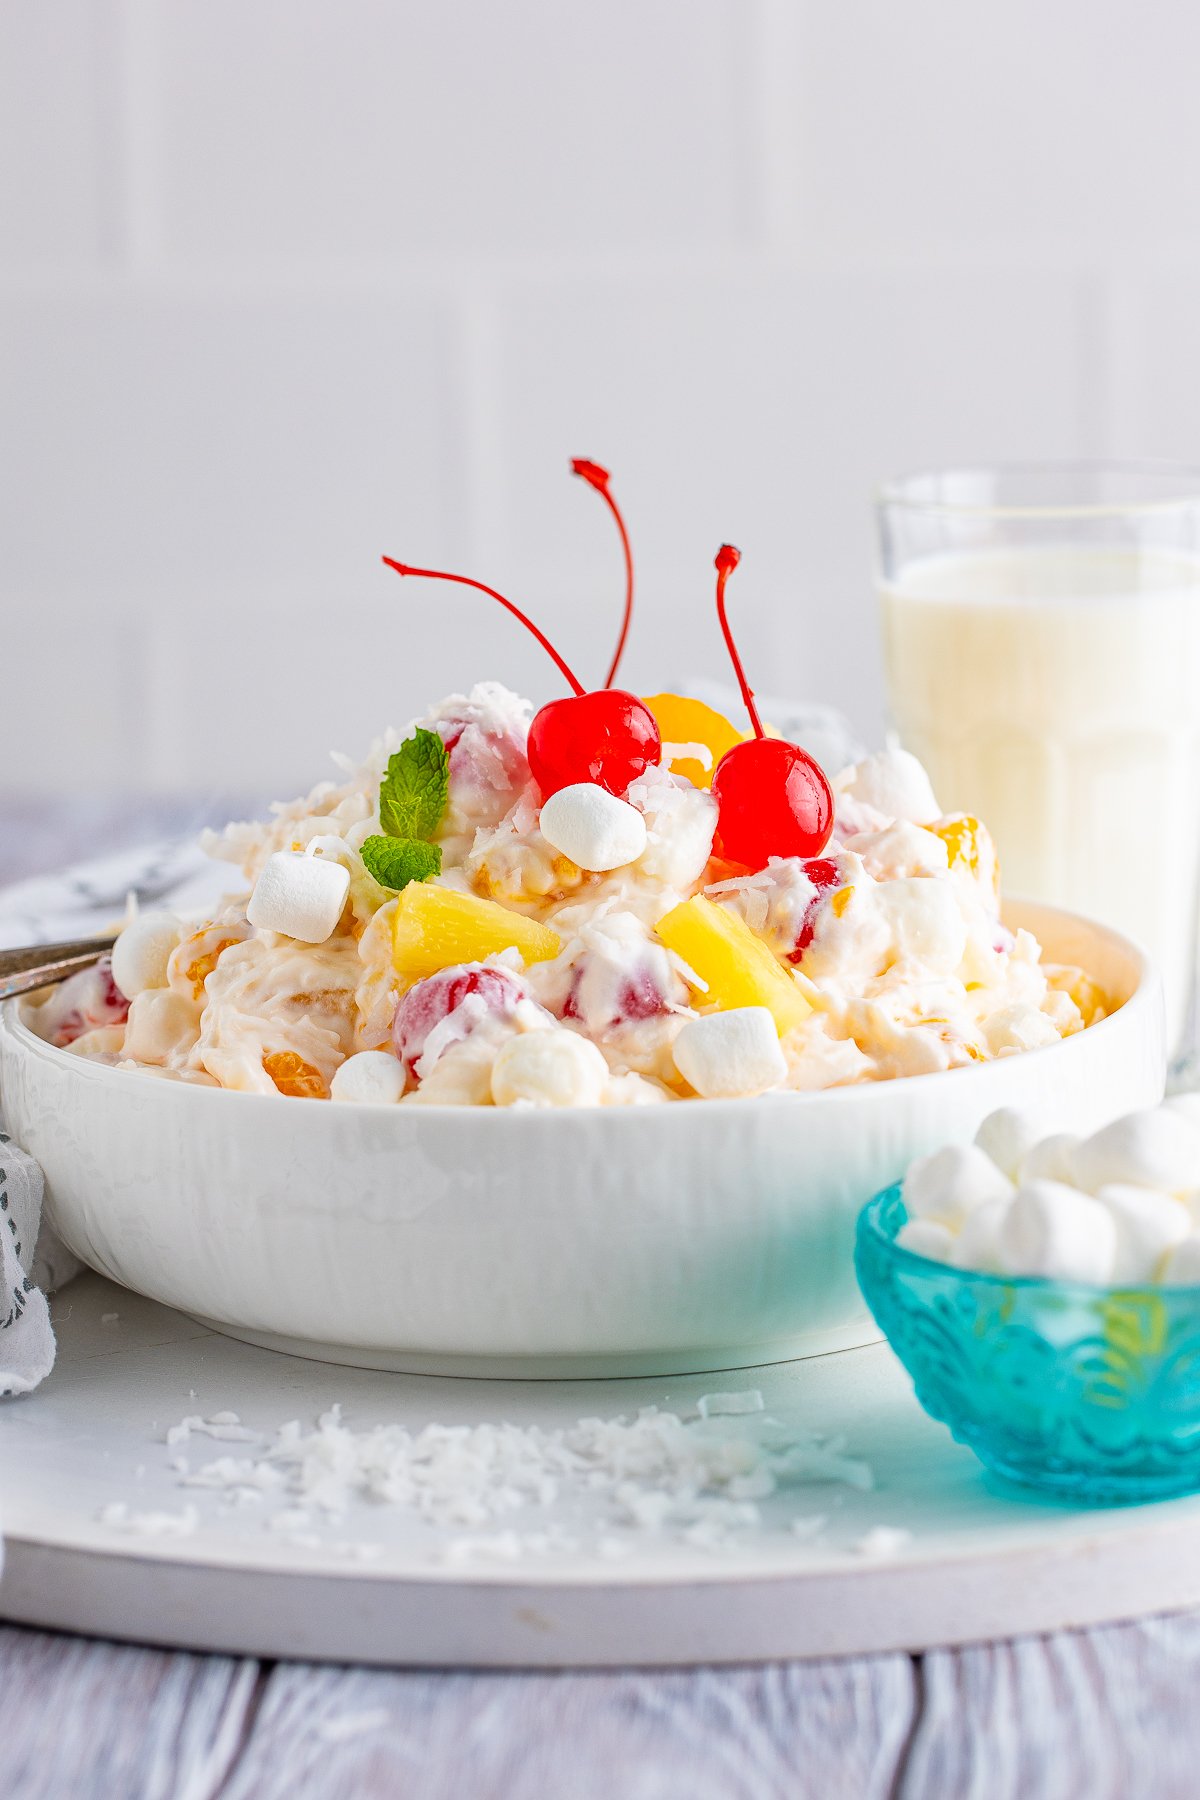 Serving dish of the Ambrosia Salad Recipe with milk behind bowl.